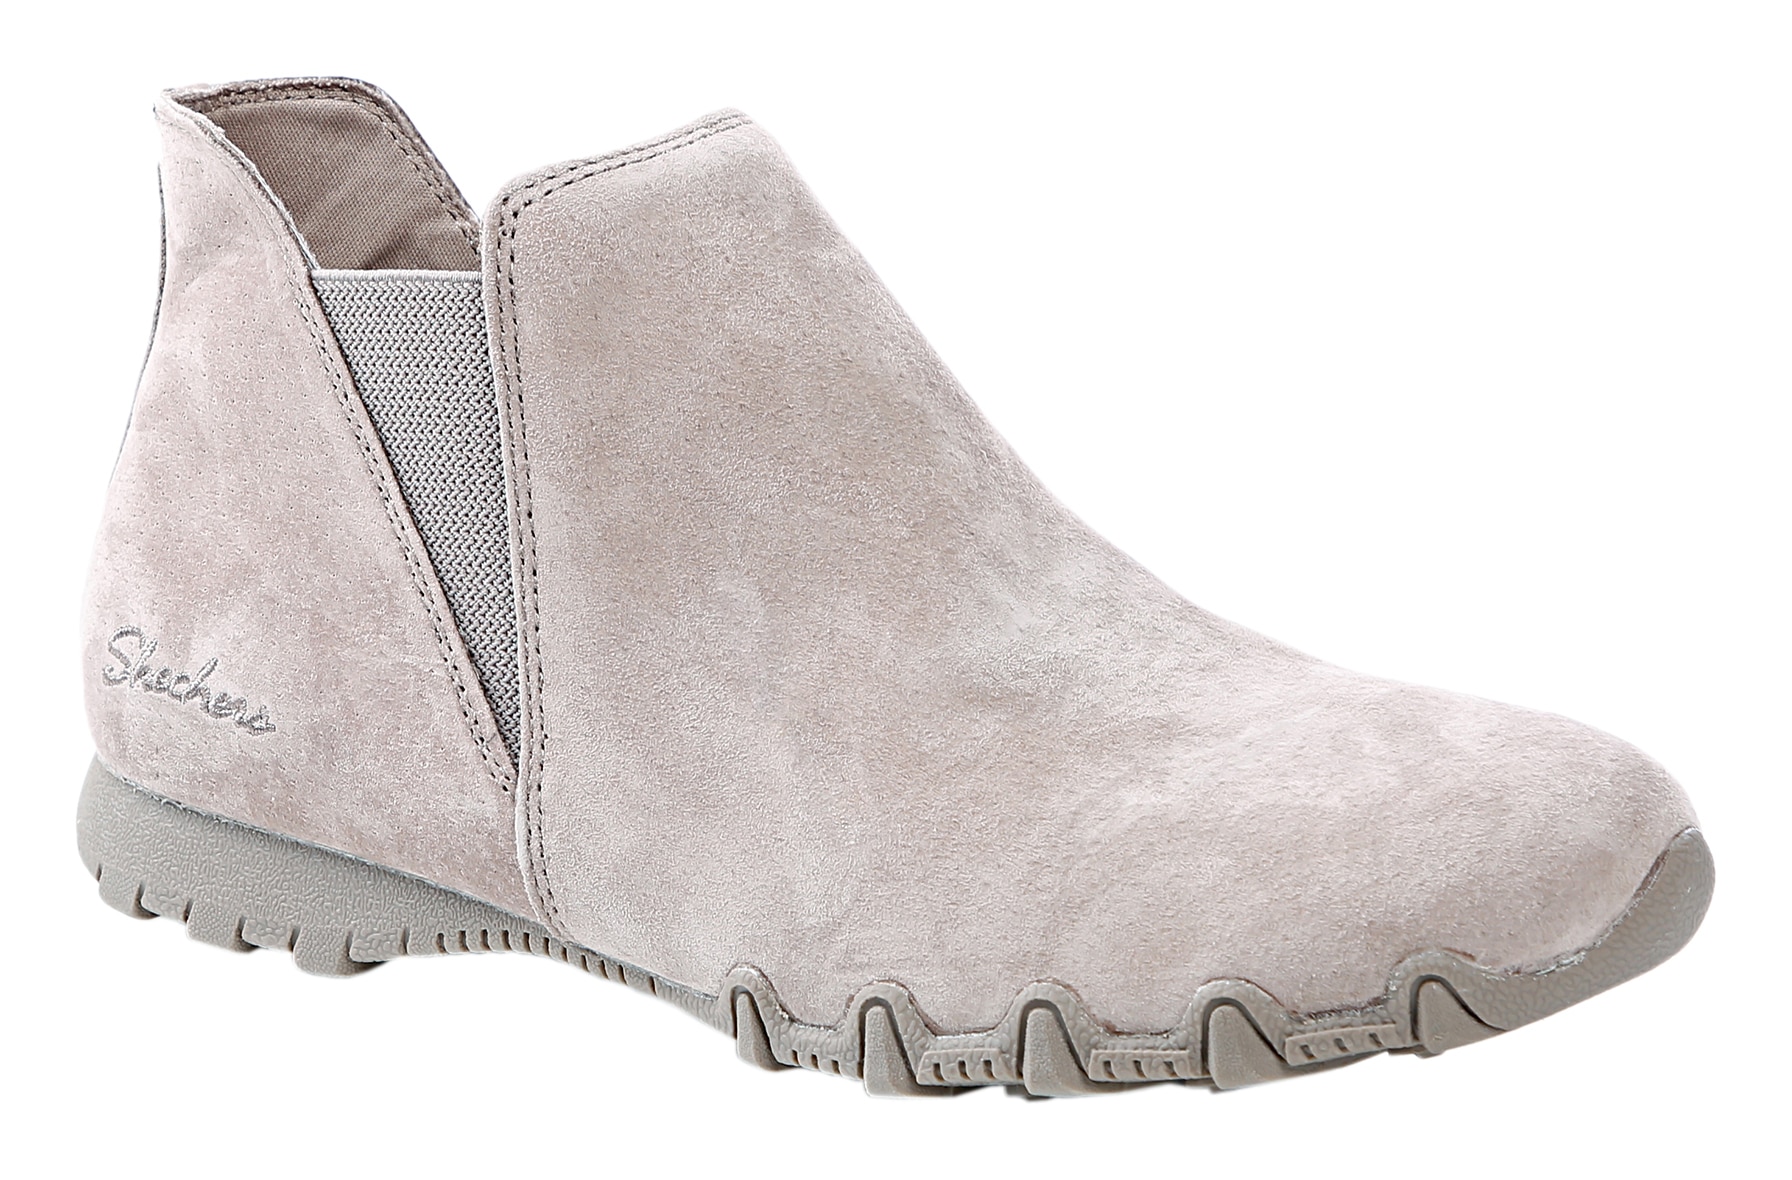 skechers suede ankle boots